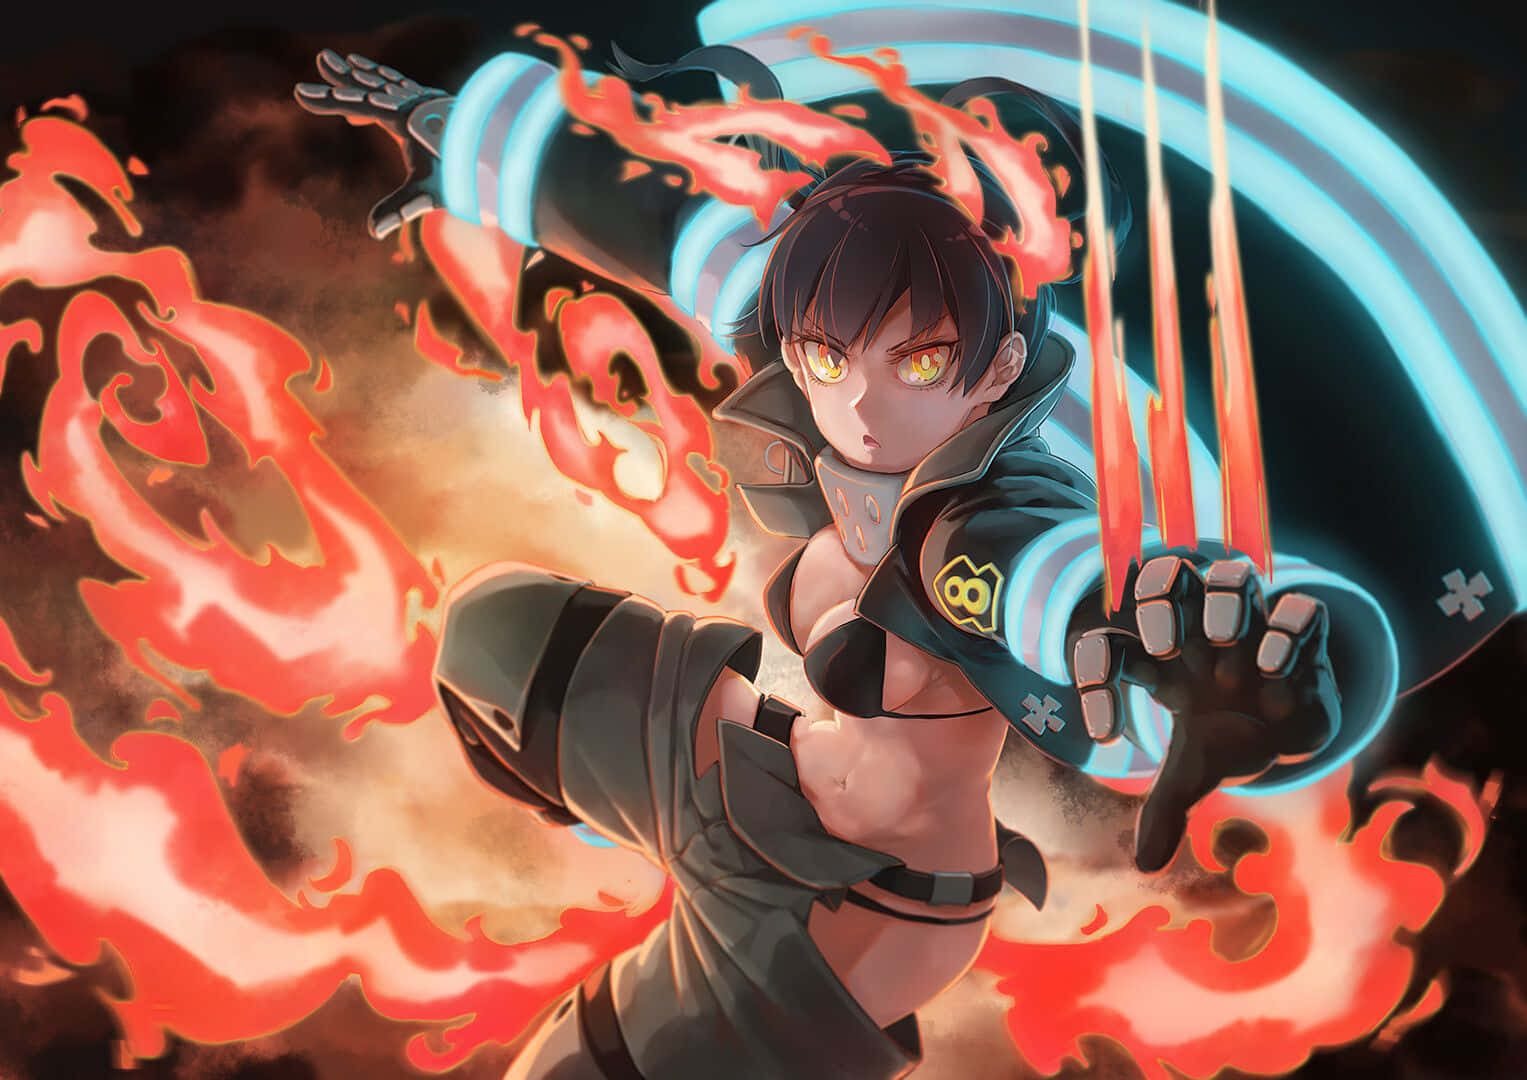 The Joker of Fire Force Activates His Power Wallpaper